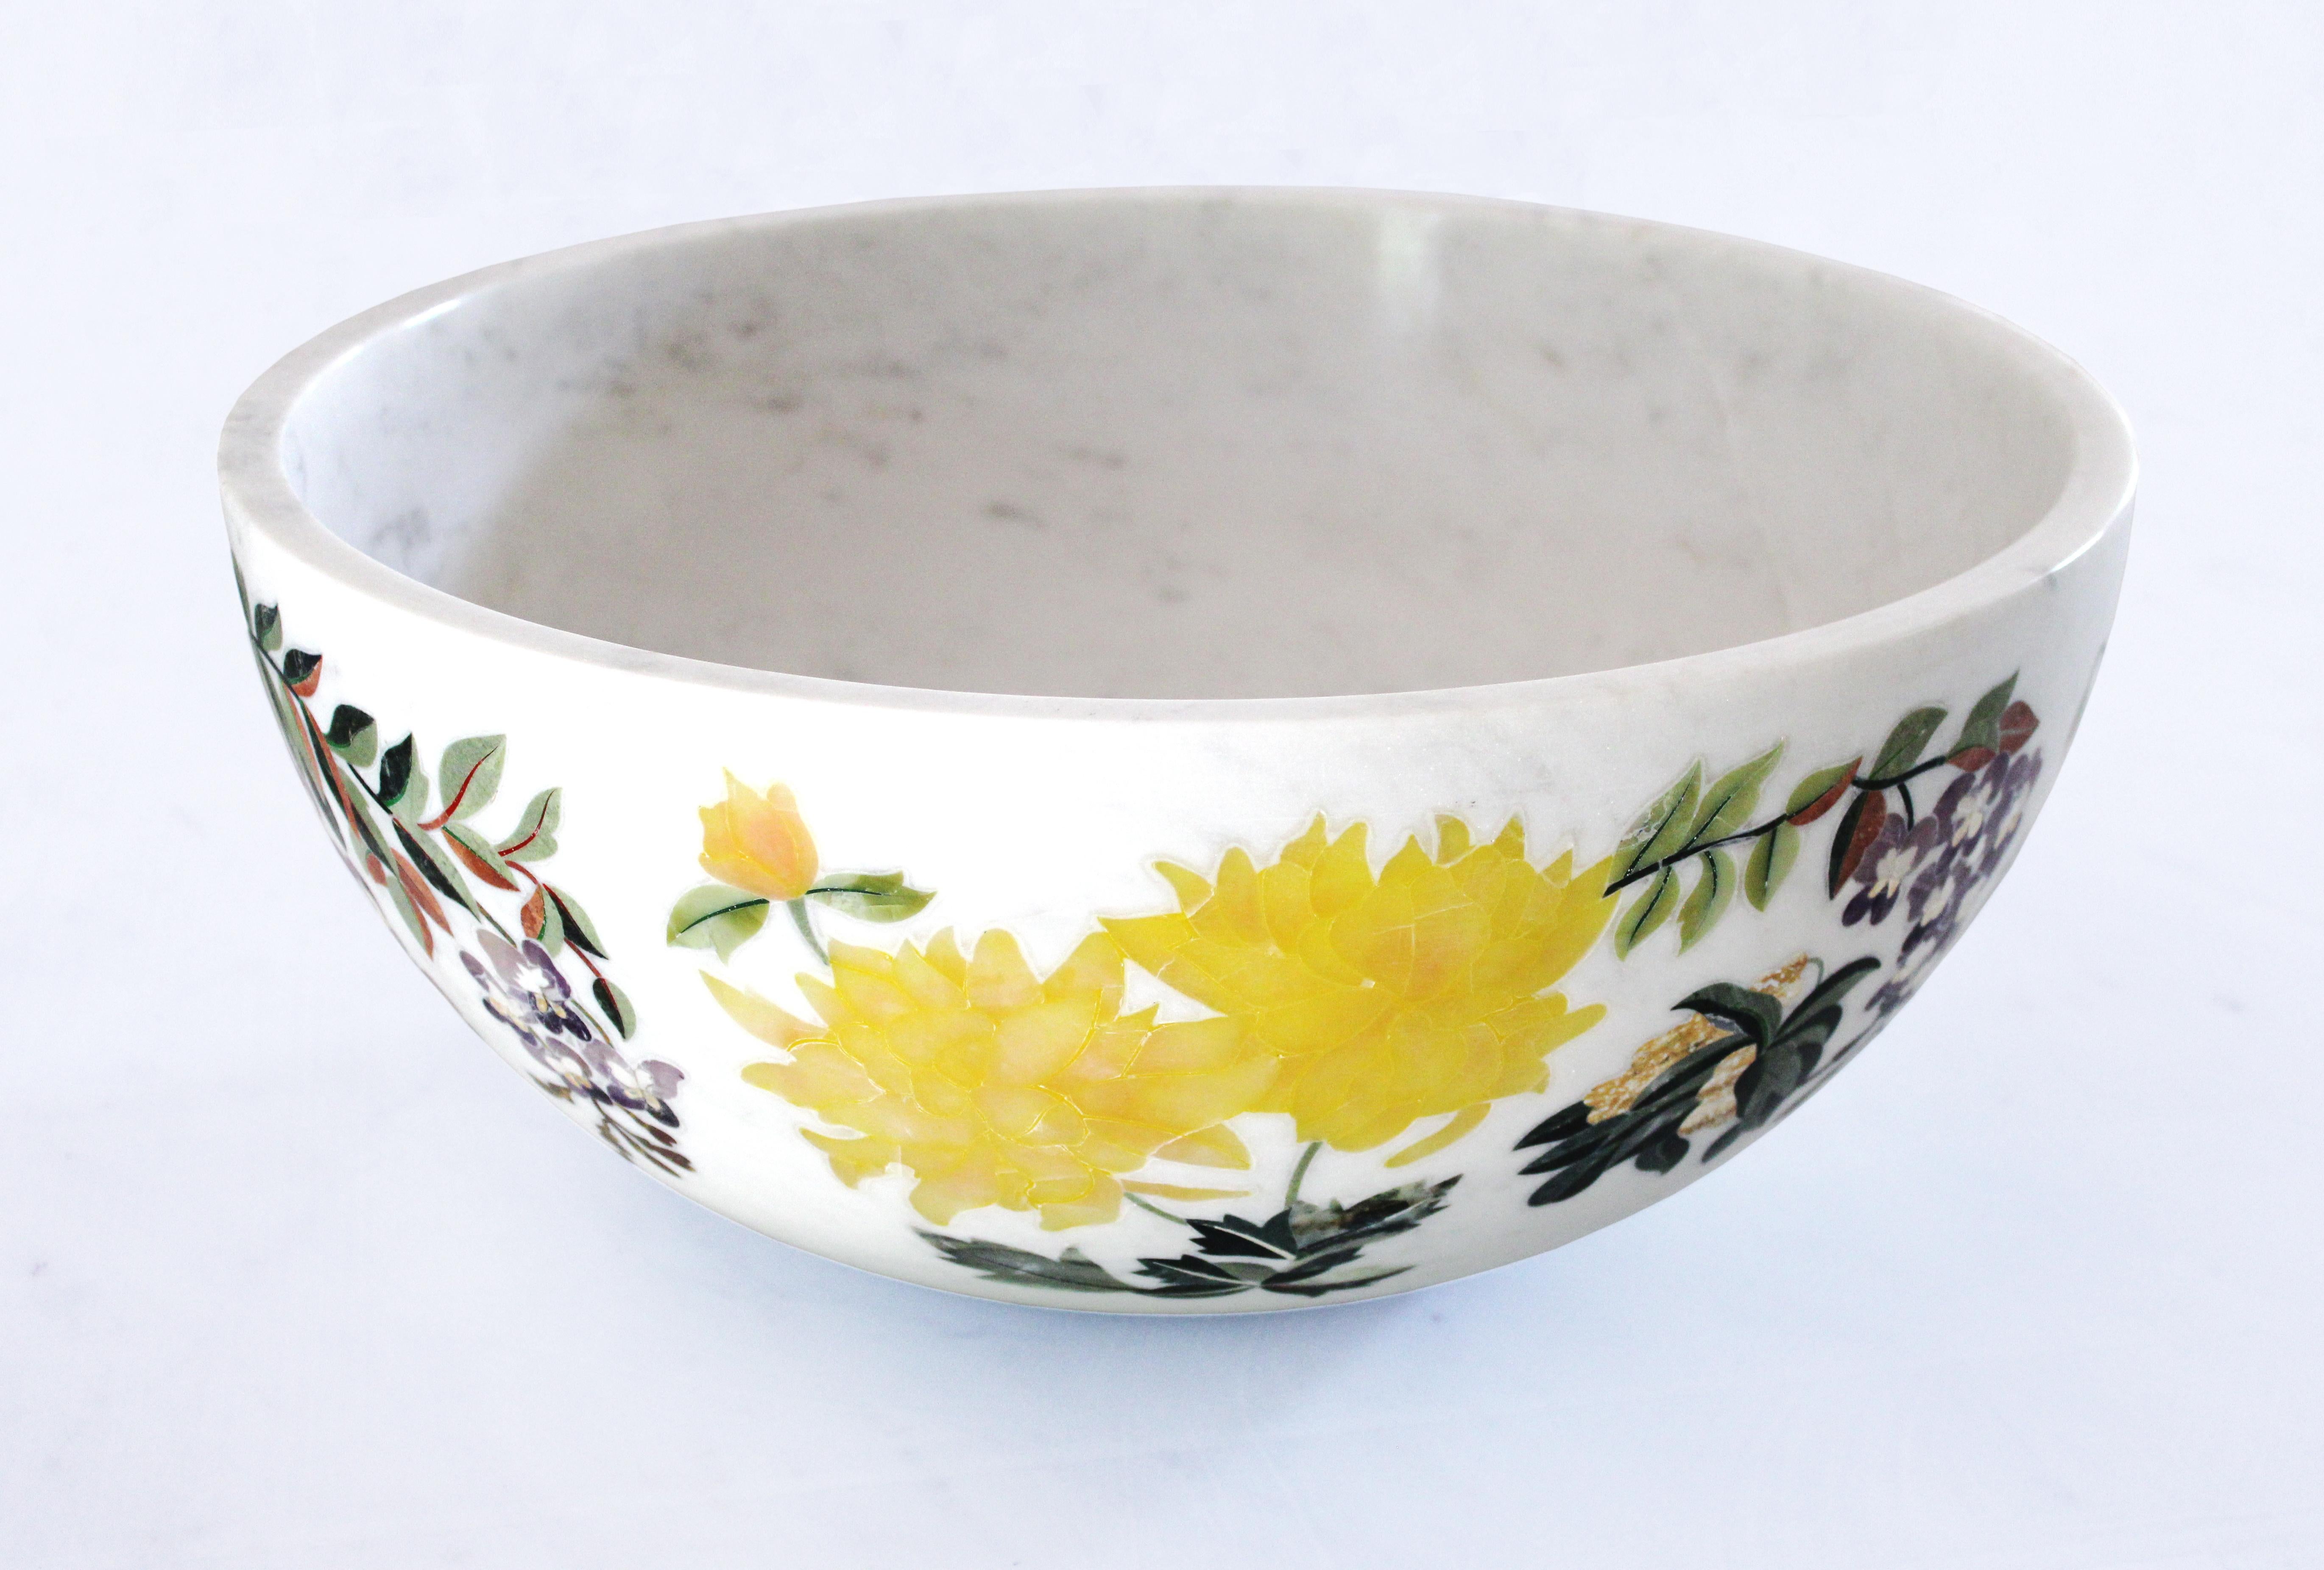 Handmade Ornamenti Bowl Inlay in White Marble by Stephanie Odegard For Sale 11